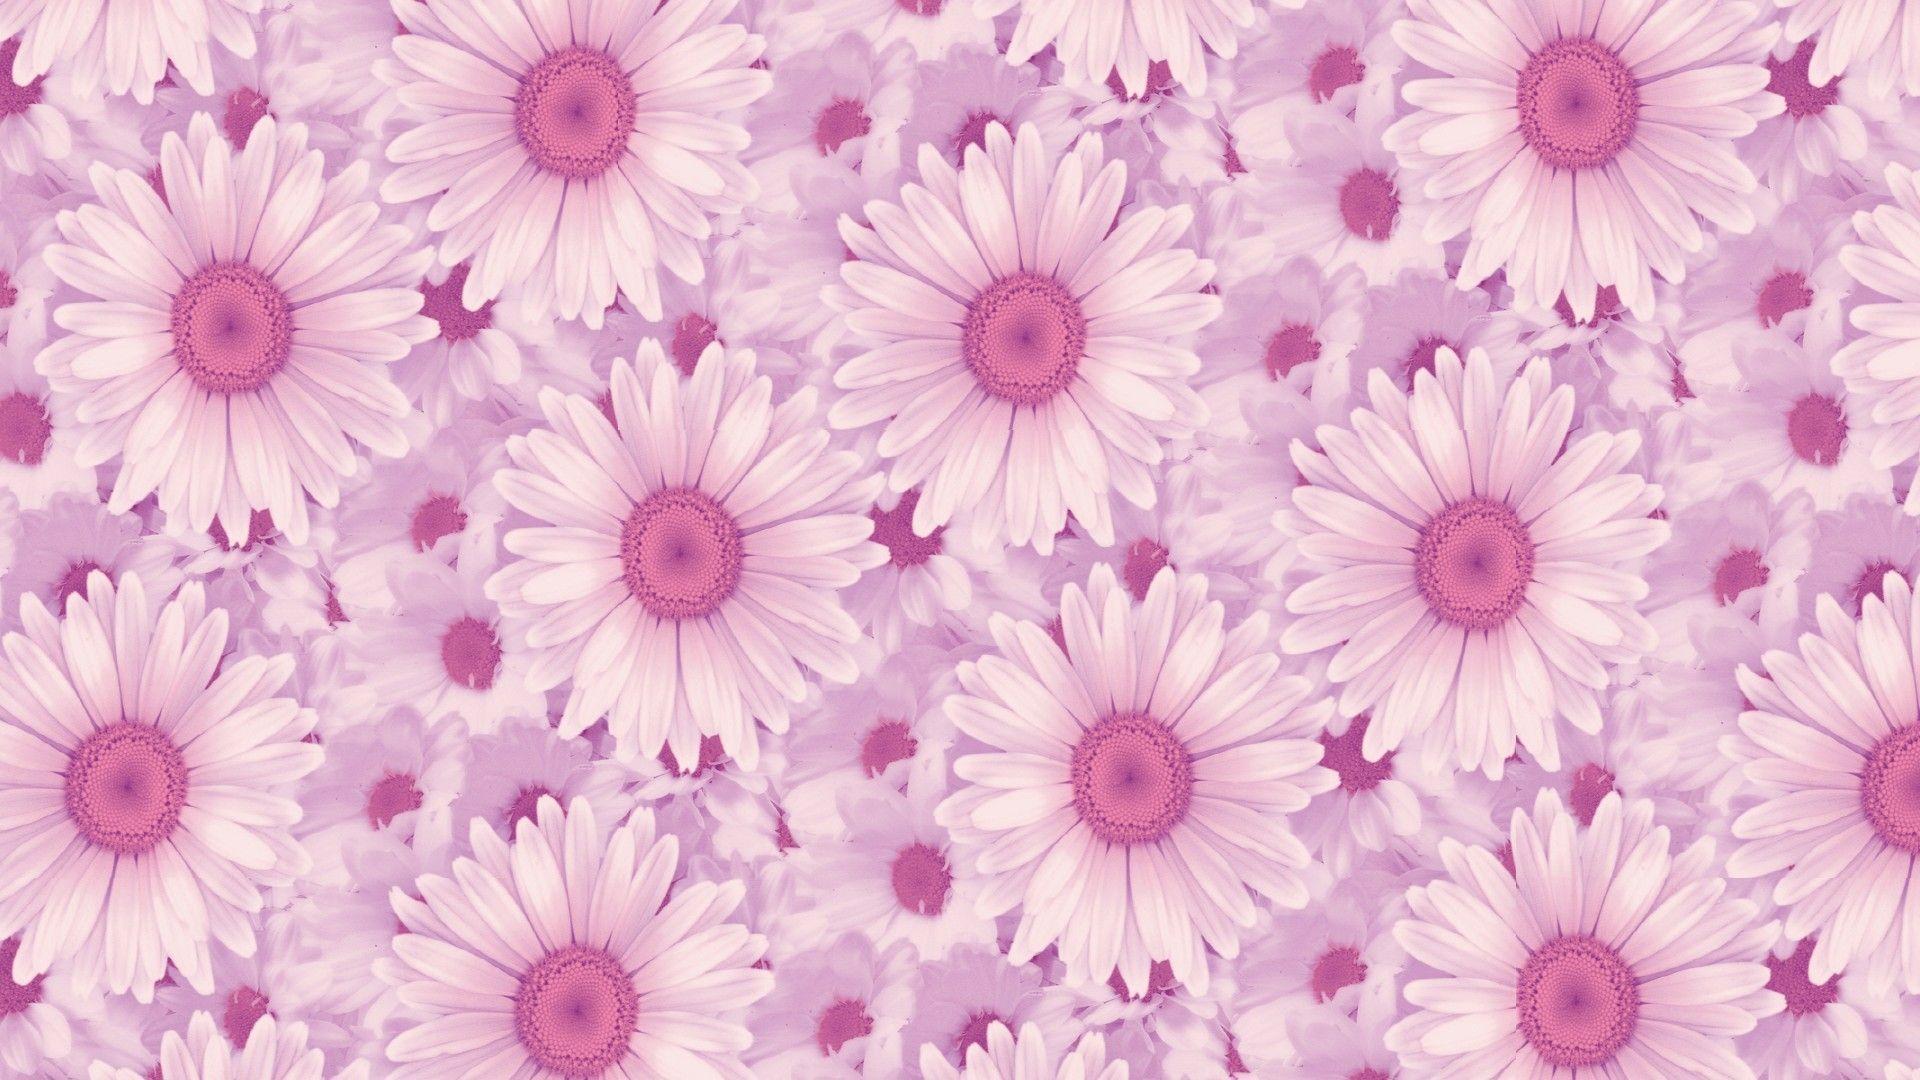 Related Picture Daisies Background Wallpaper Picture Photo